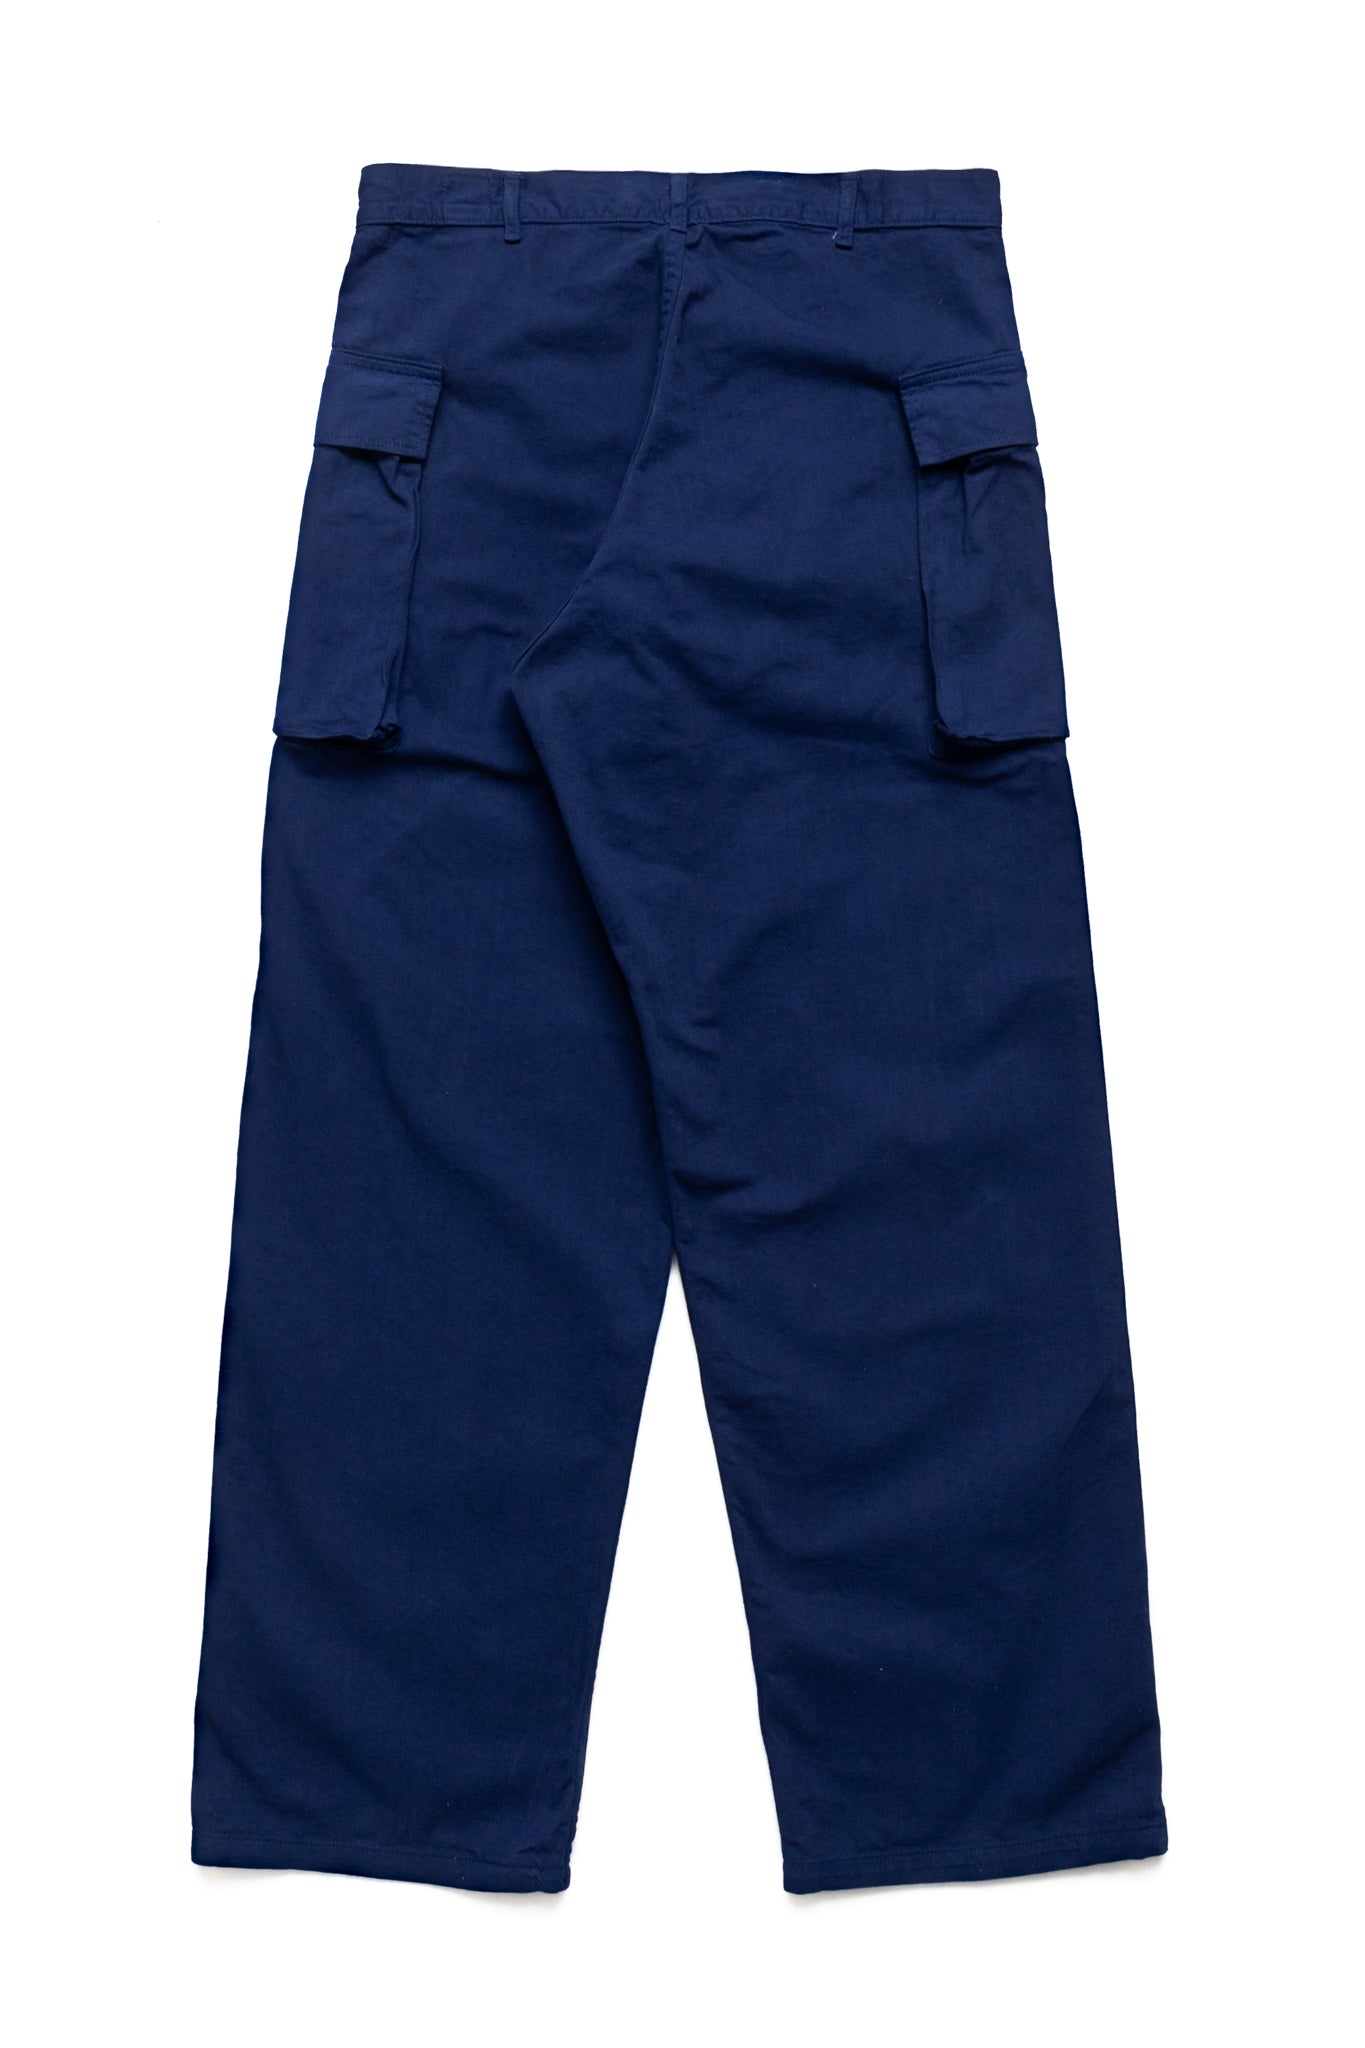 2 Pocket Cargo Pants Blue in Green Exclusive - Blue